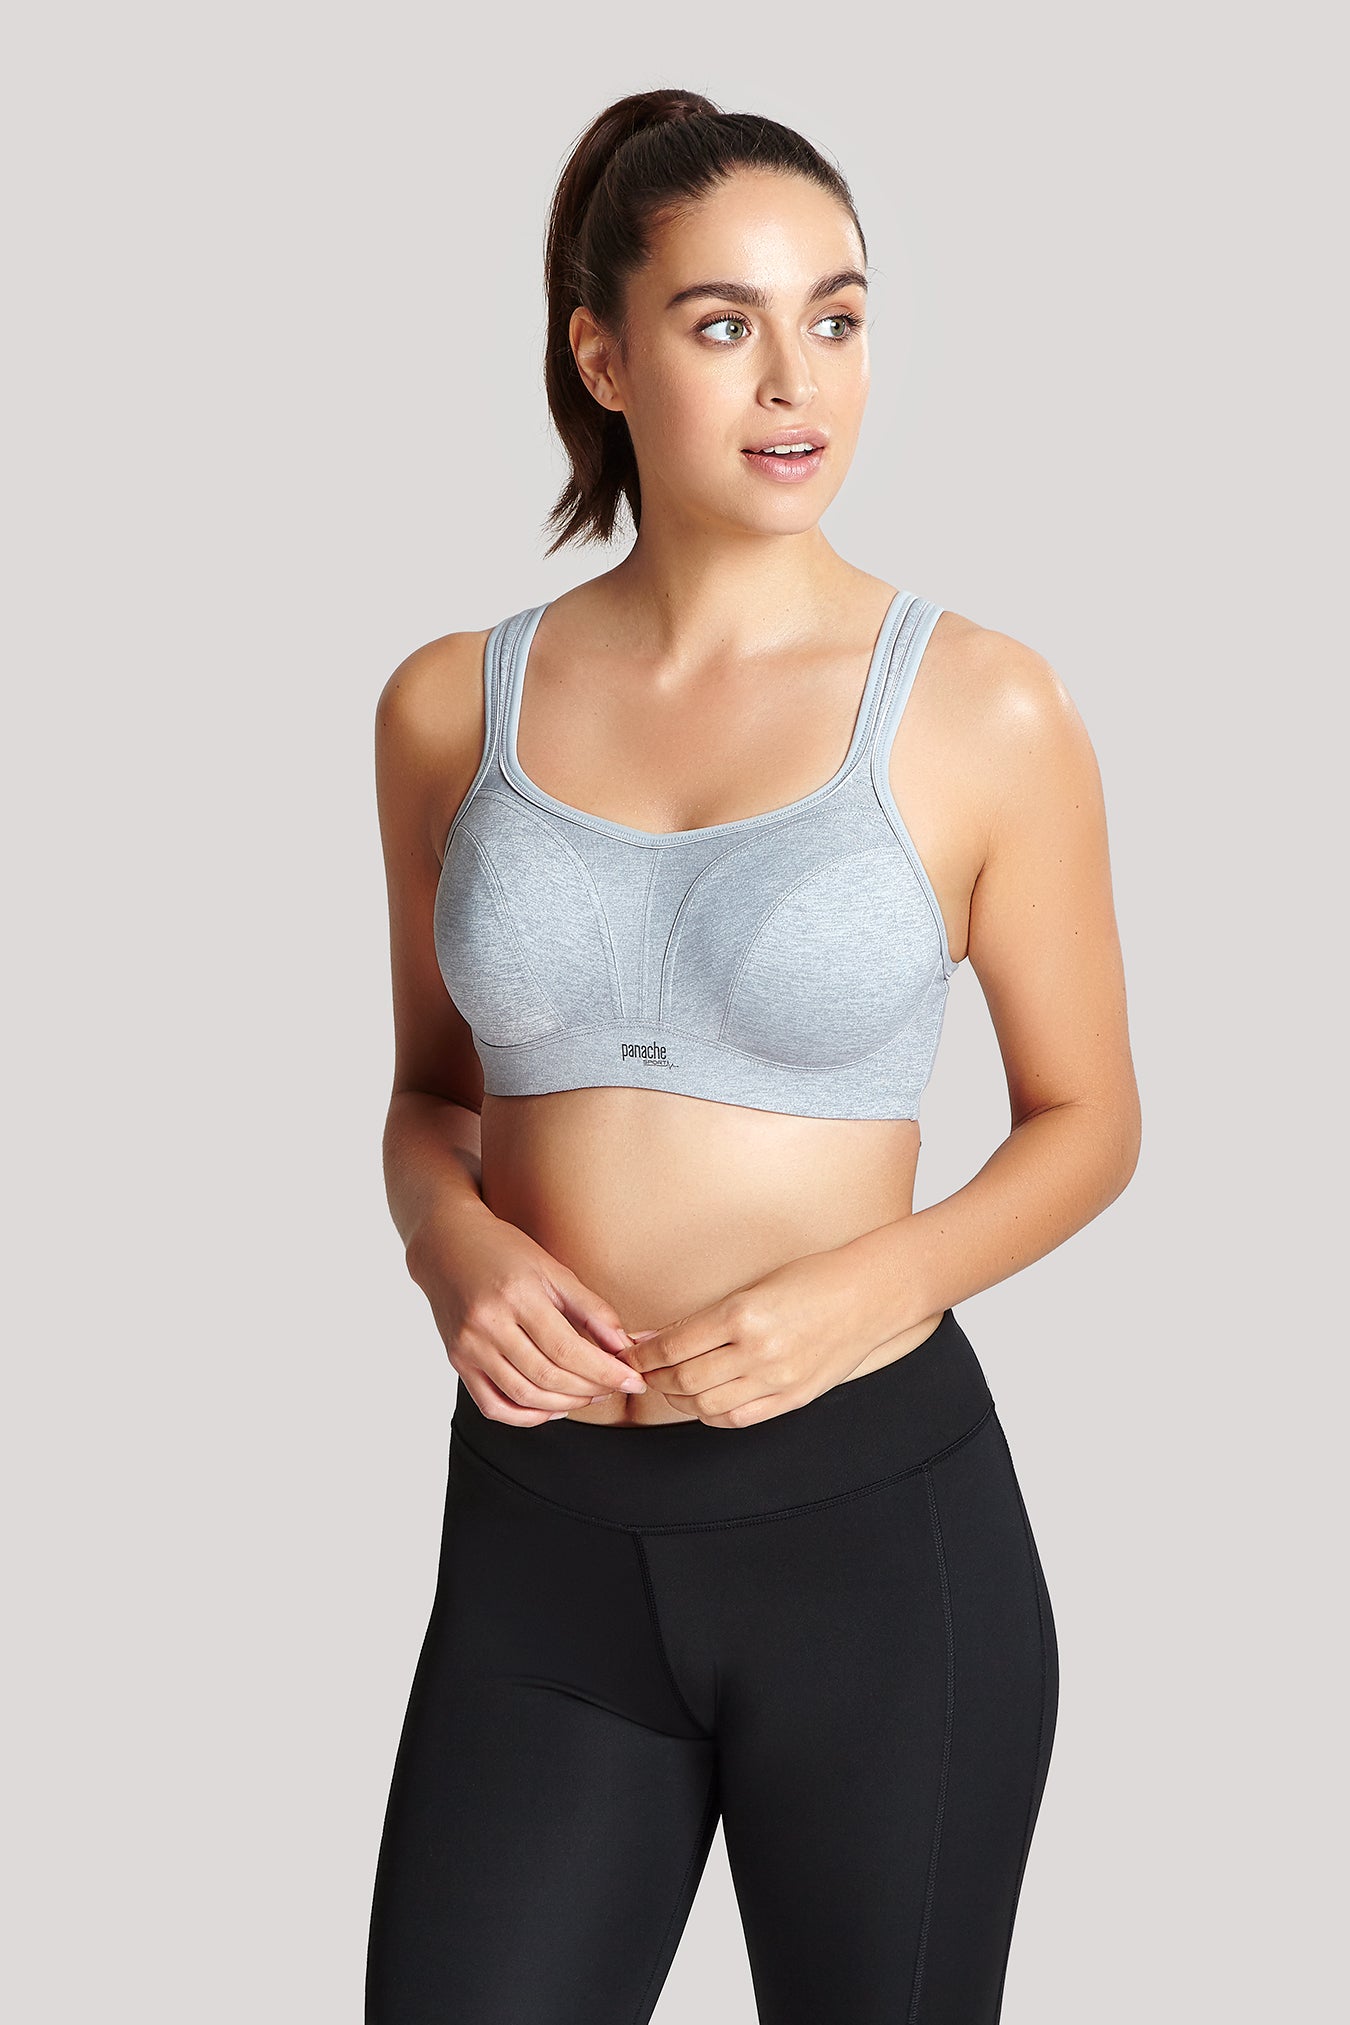 Panache Classic Underwired Sports Bra Marled Grey – Curvaceous